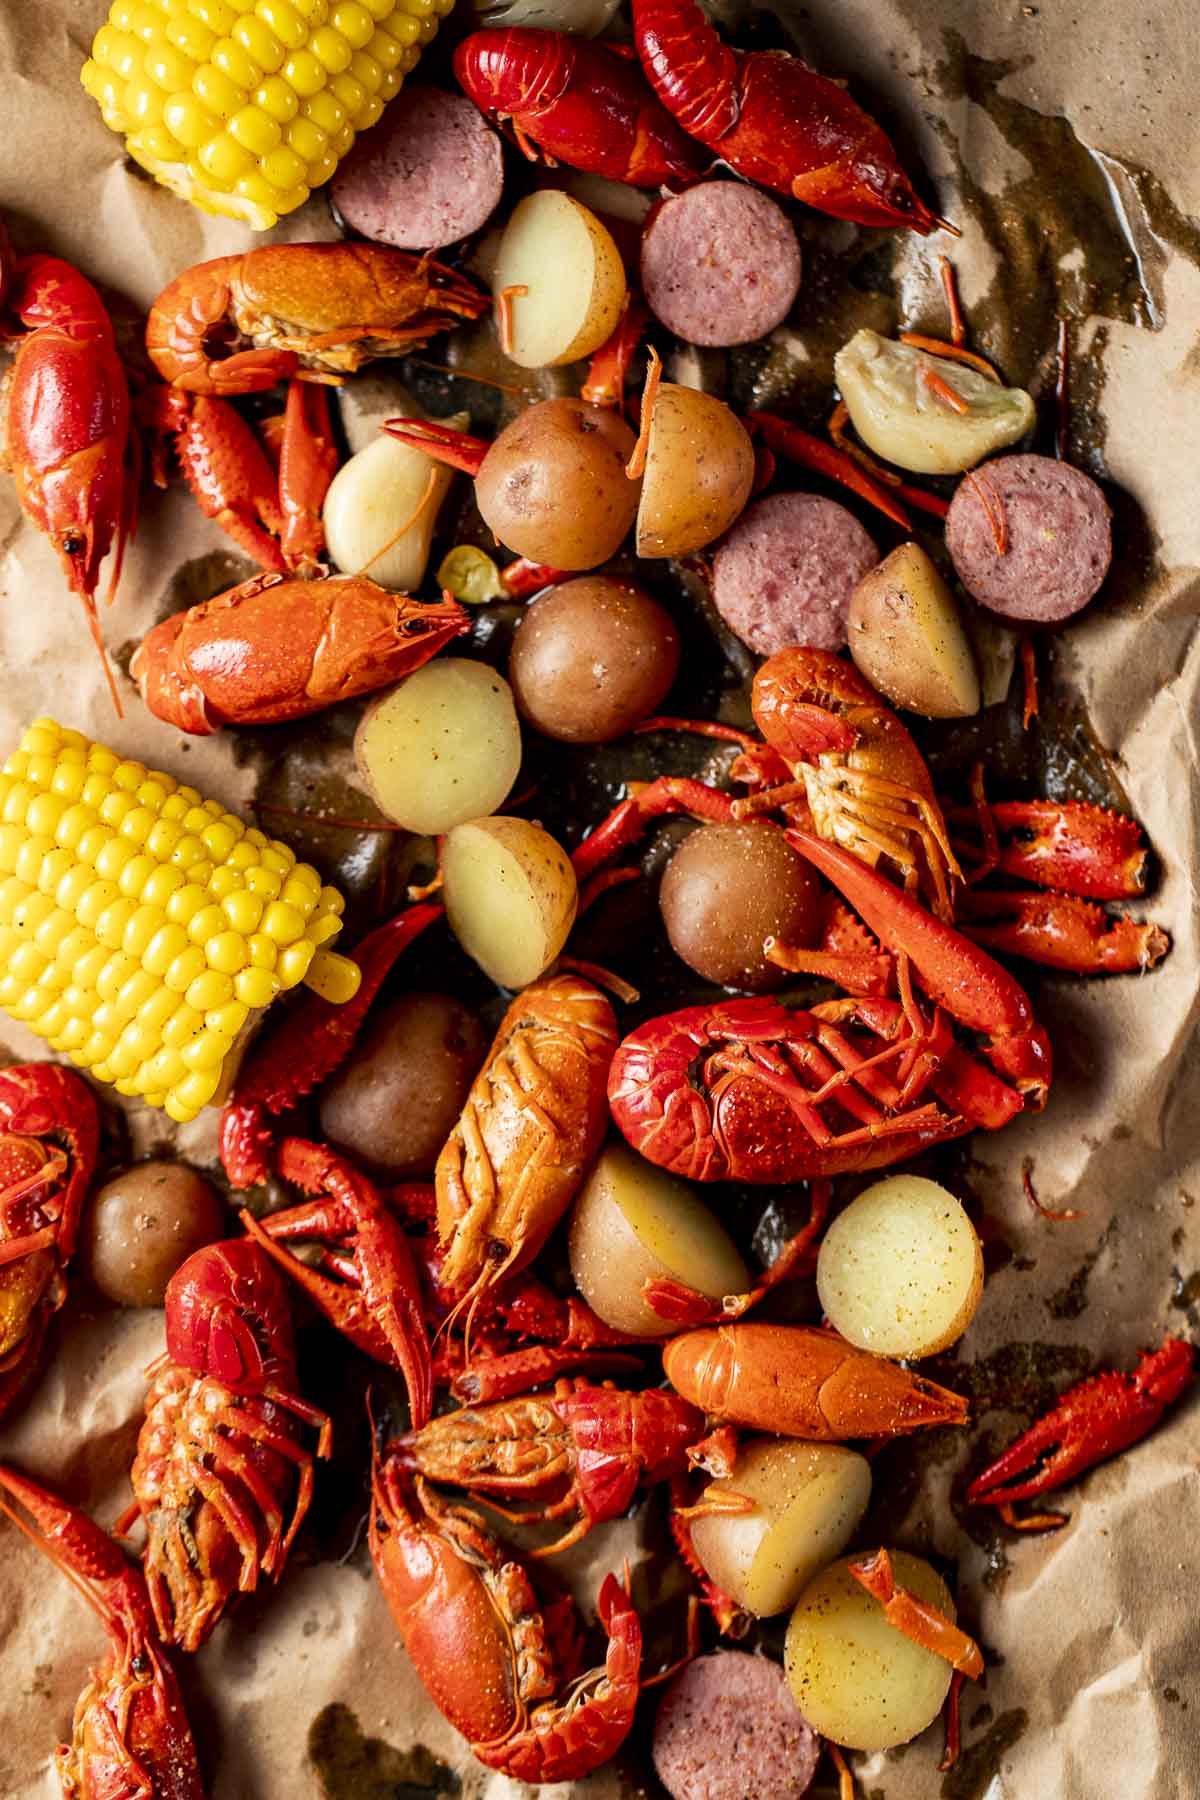 Can You Do A Crawfish Boil On The Stove